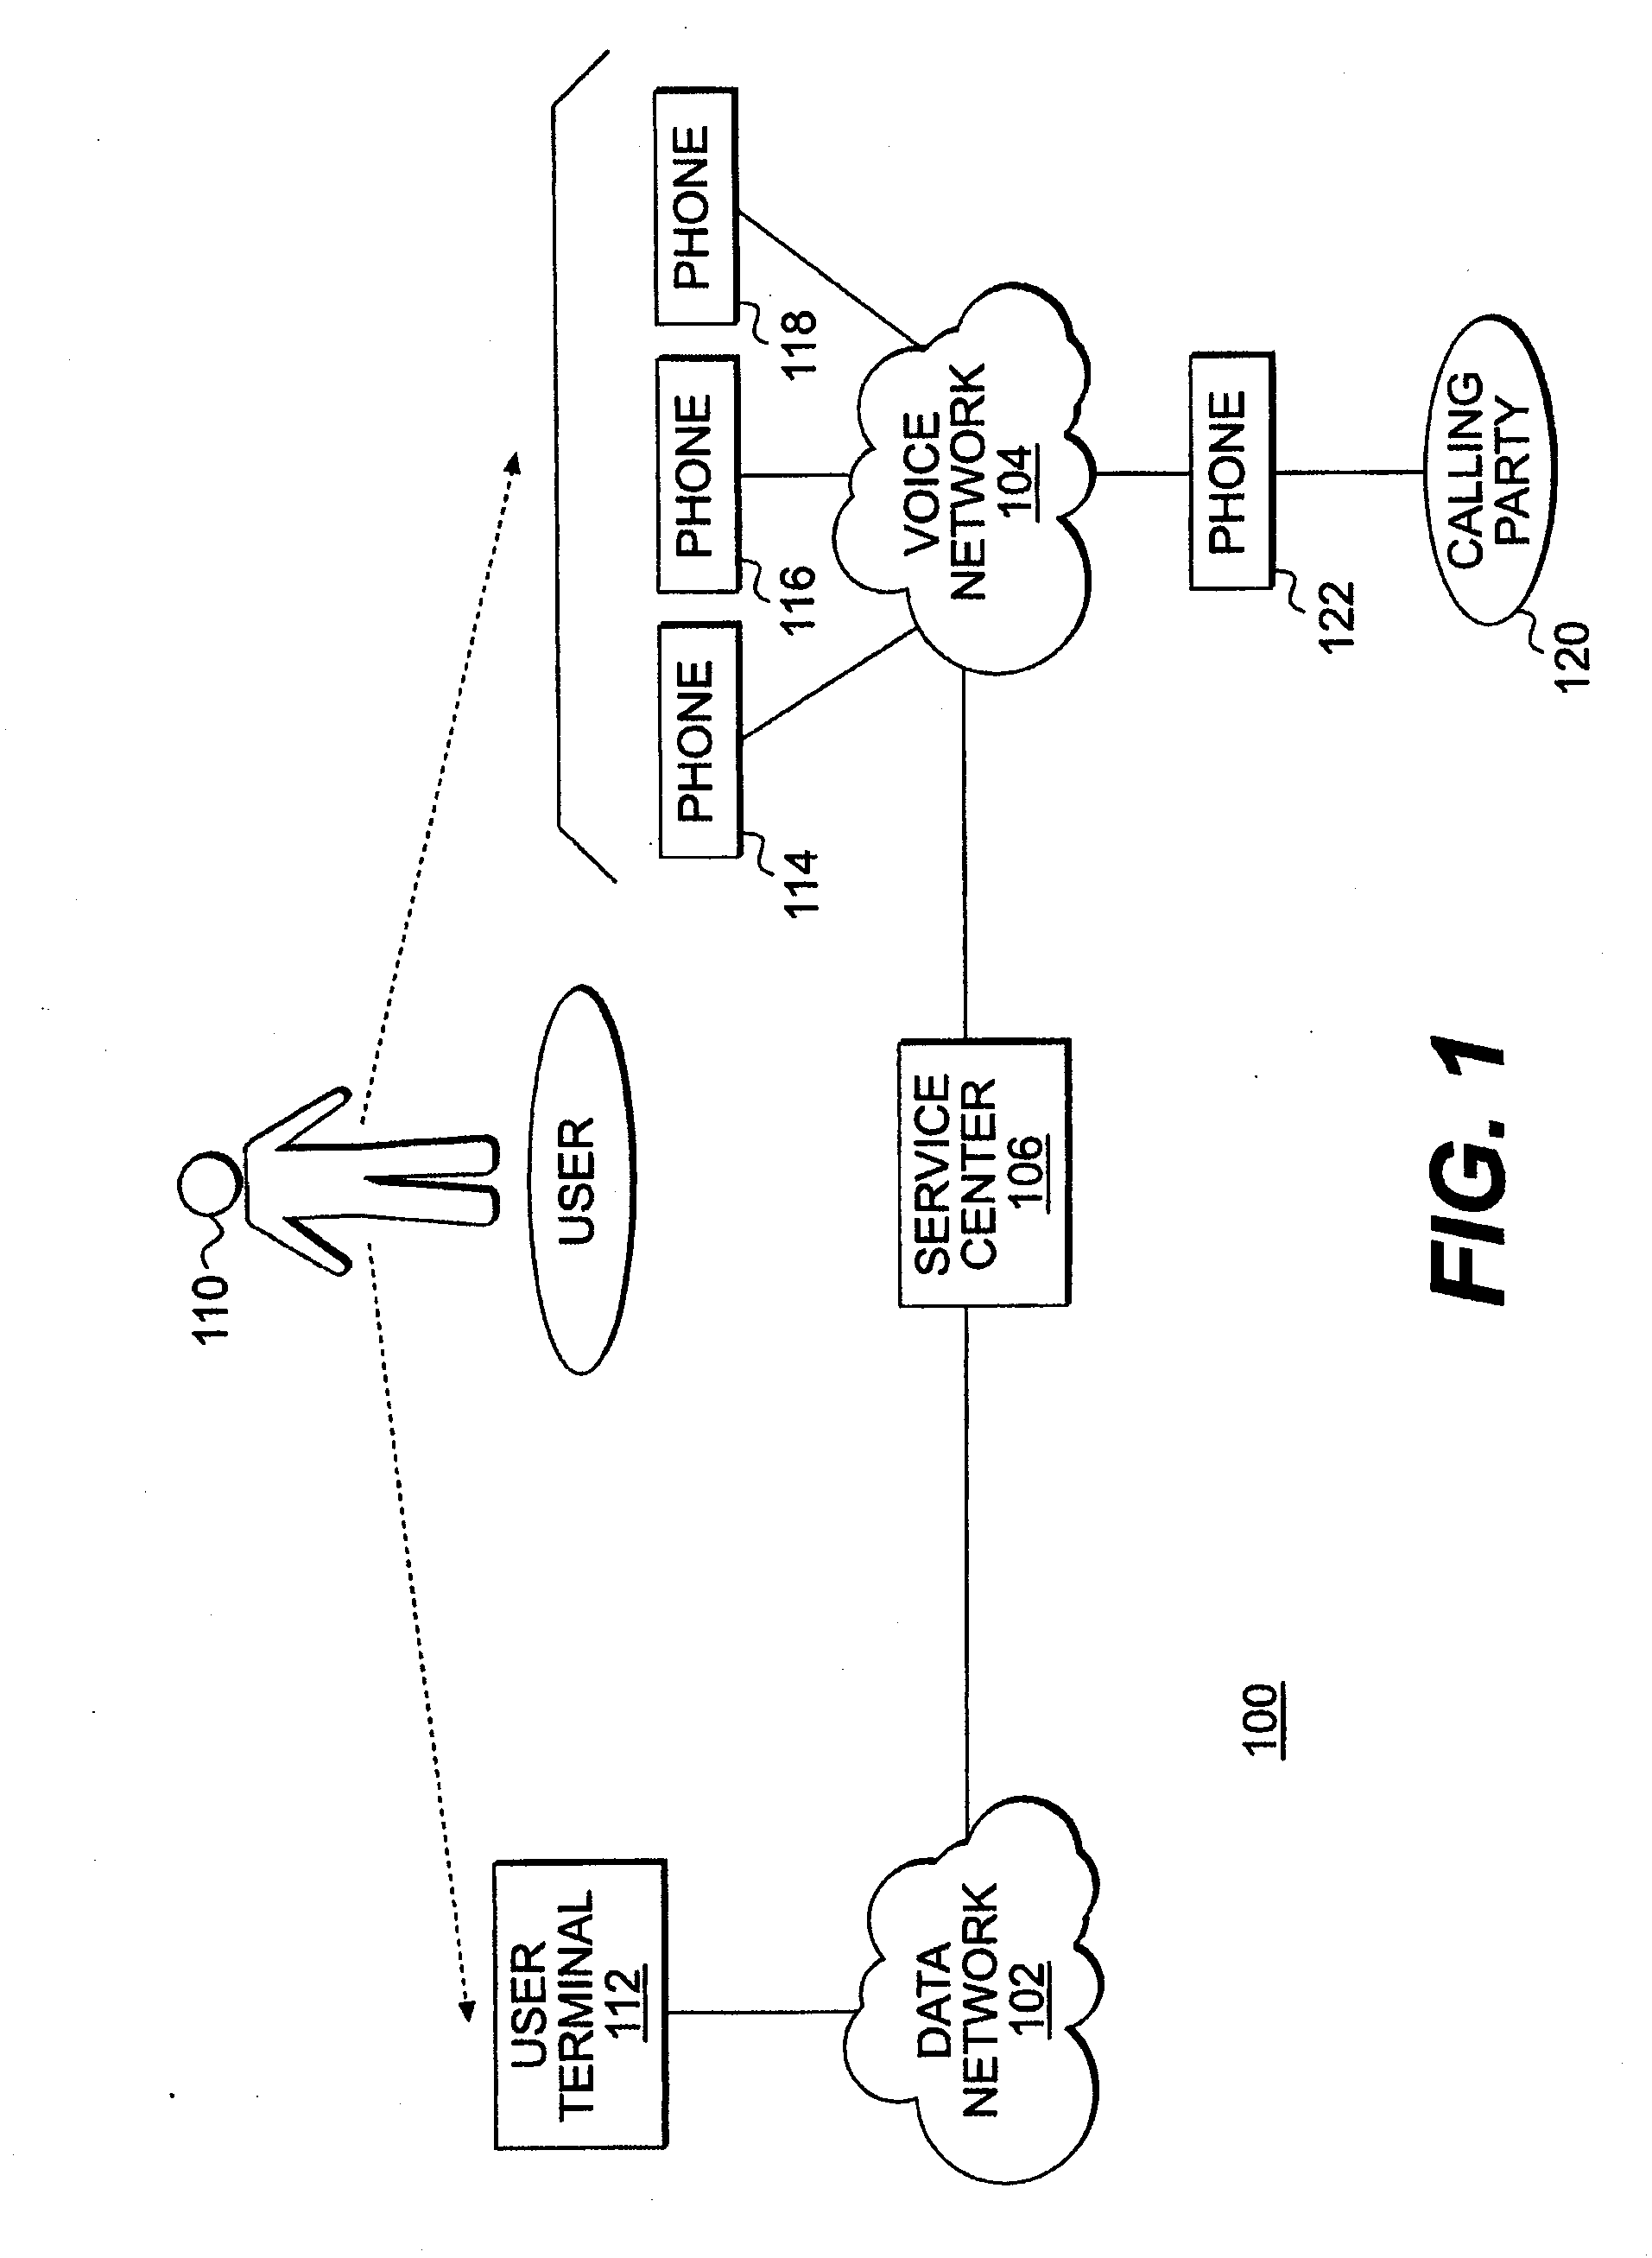 Method and Apparatus for Address Book Contact Sharing